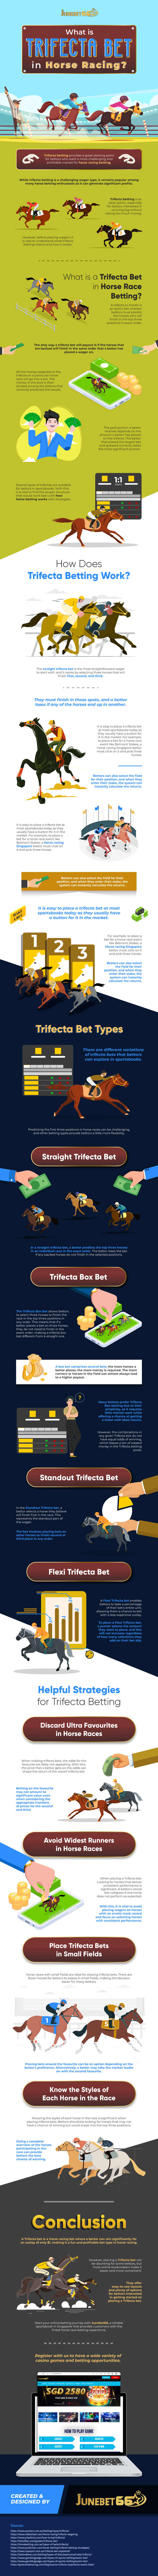 What-is-Trifecta-Bet-in-Horse-Racing?-Infographic-08